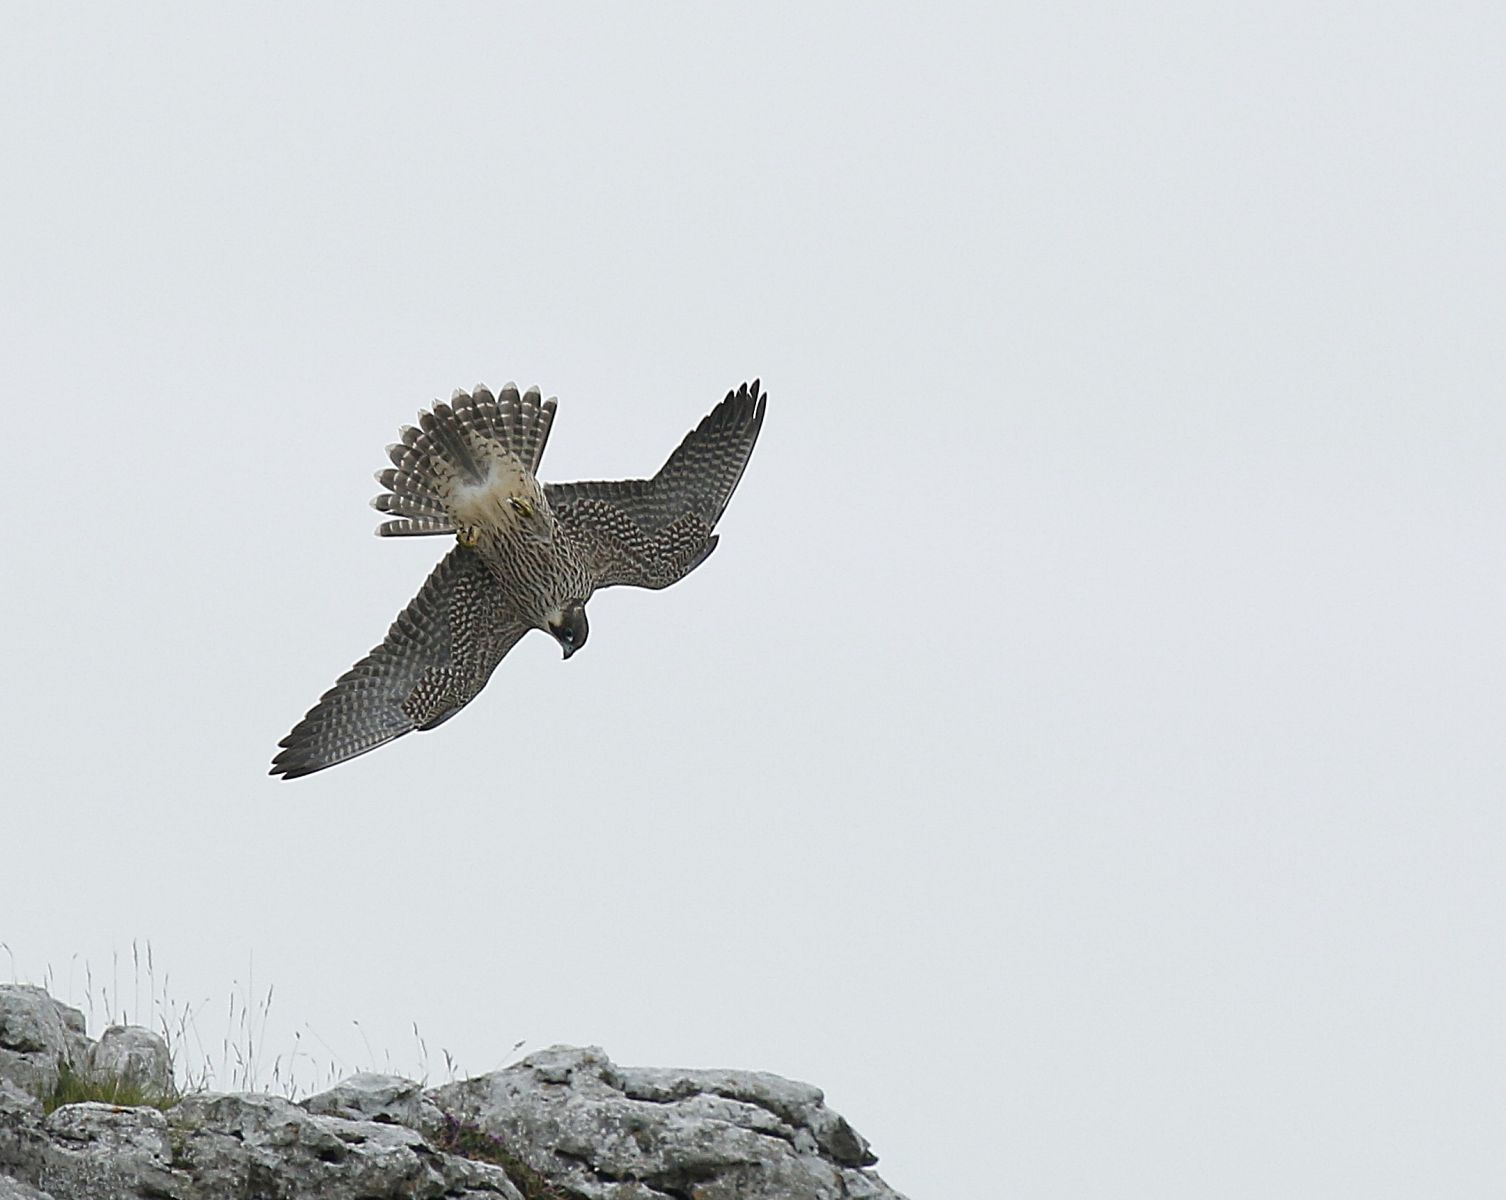 Peregrine falcon at Malham by Dave Dimmock